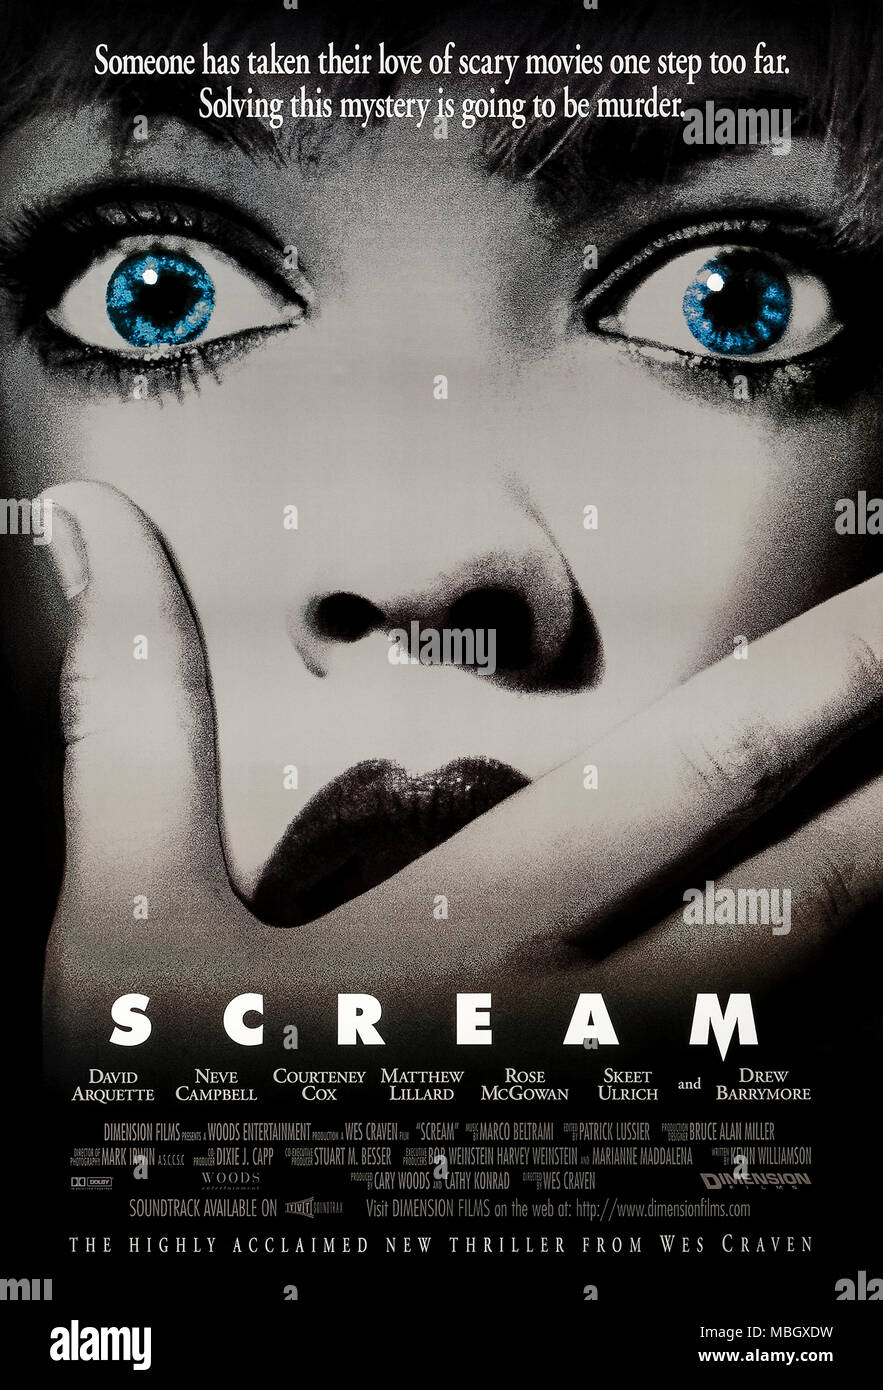 Scream (1996) directed by Wes Craven and starring Neve Campbell, Courteney Cox and David Arquette. A serial killer terrorizes a teenager and her friends using memorable stereotypes from past horror films. What’s your favorite scary movie? Stock Photo